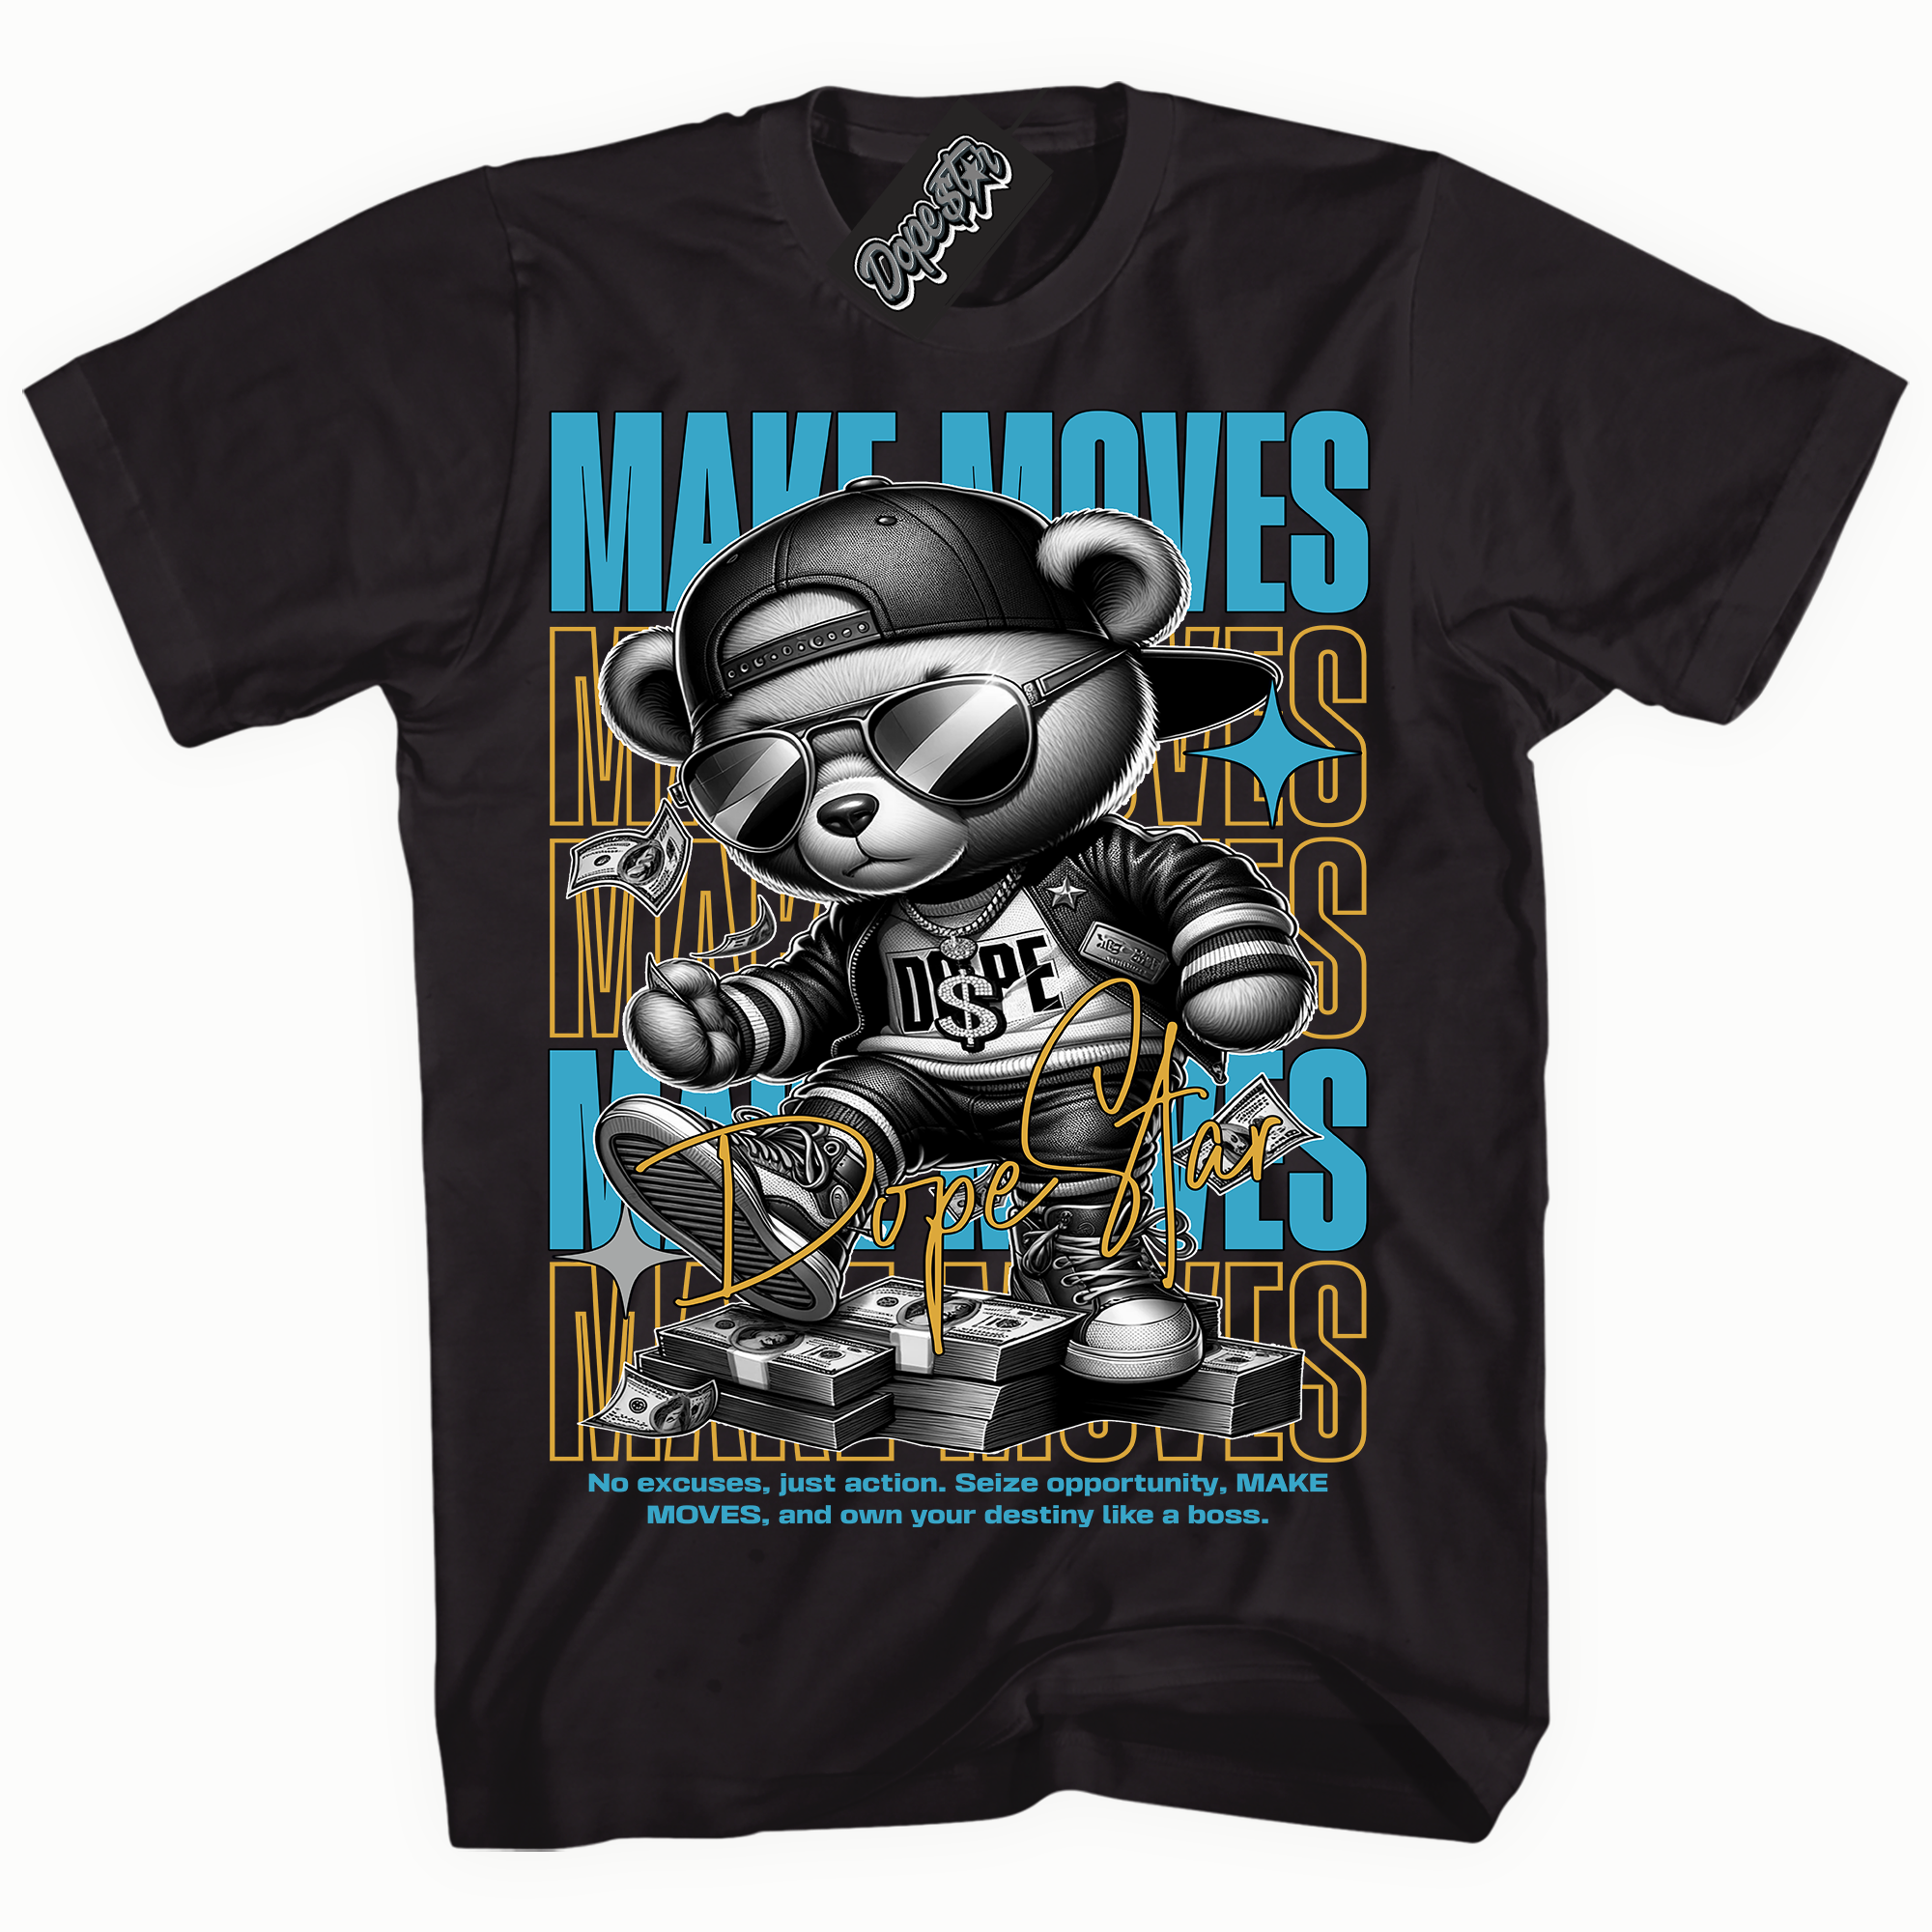 Cool Black graphic tee with “ Makin Moves ” print, that perfectly matches AQUA 5s sneakers 